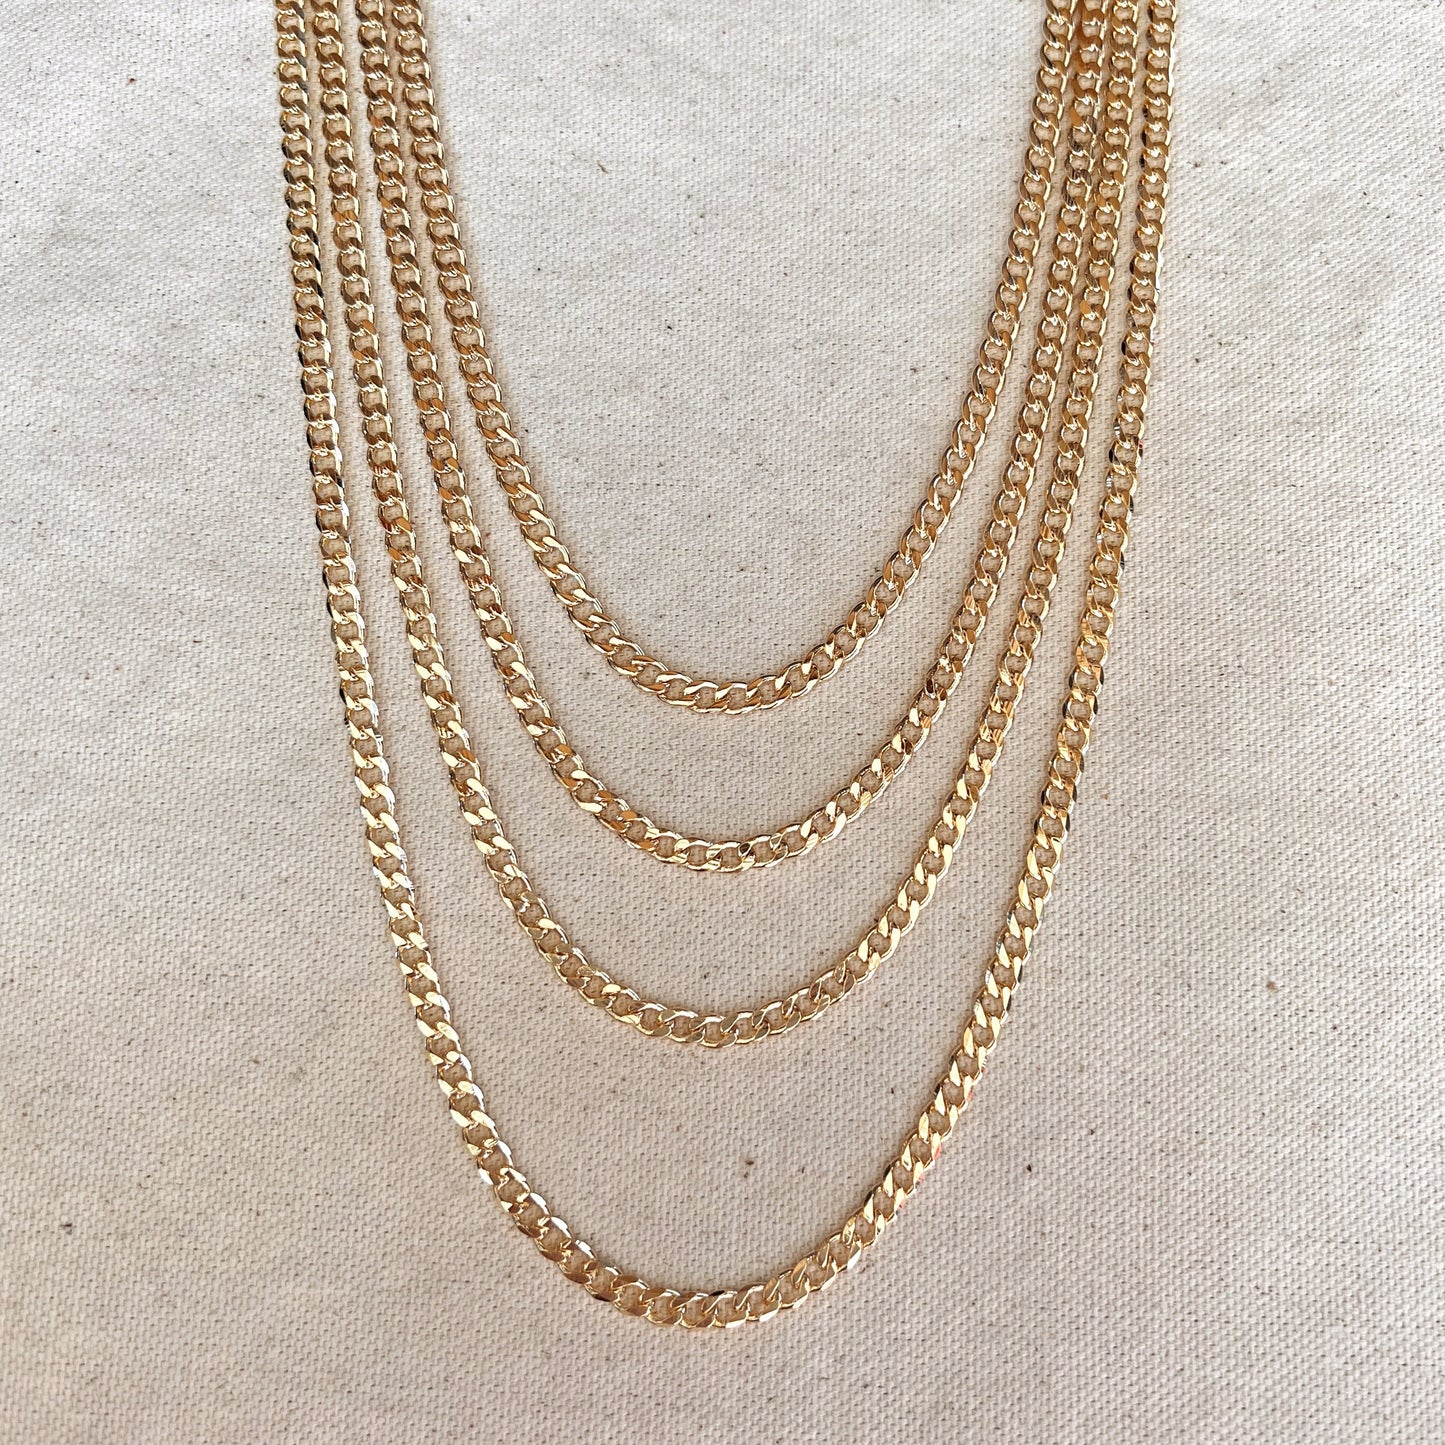 Engraved Italy 18k Gold Filled Miami Cu Ban 26” 12mm Heavy Chain